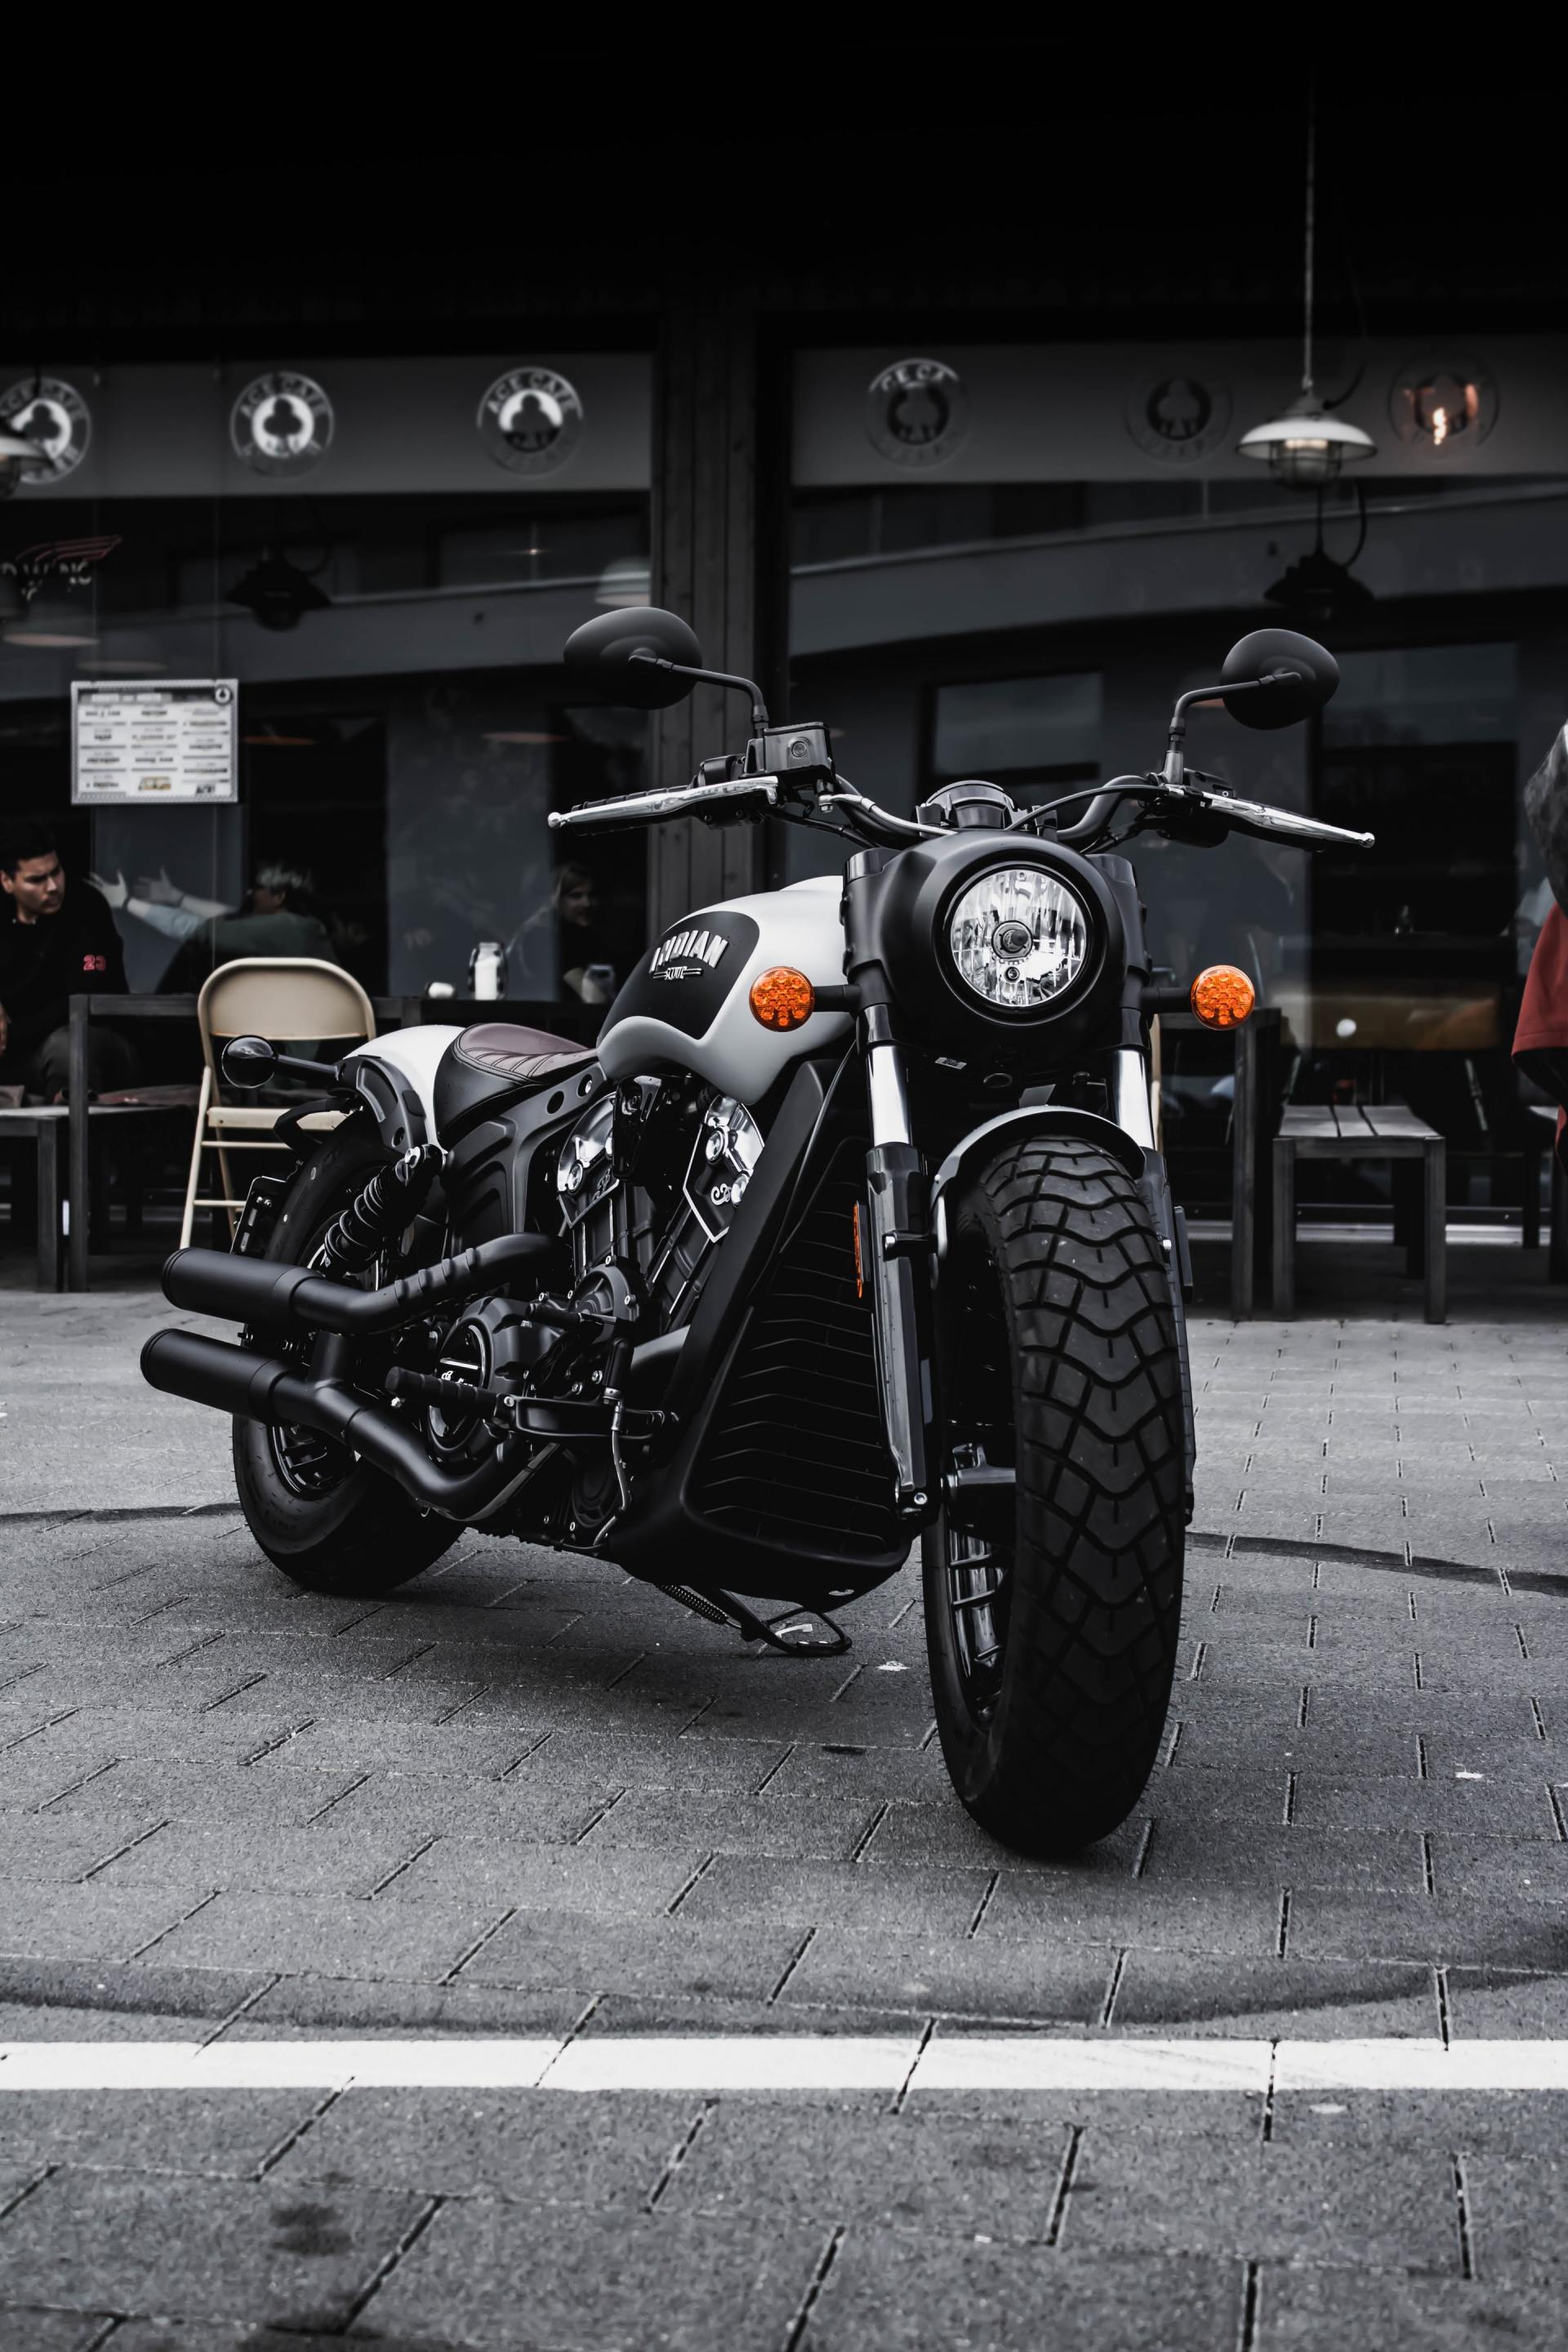 Silver and black indain motorcycle